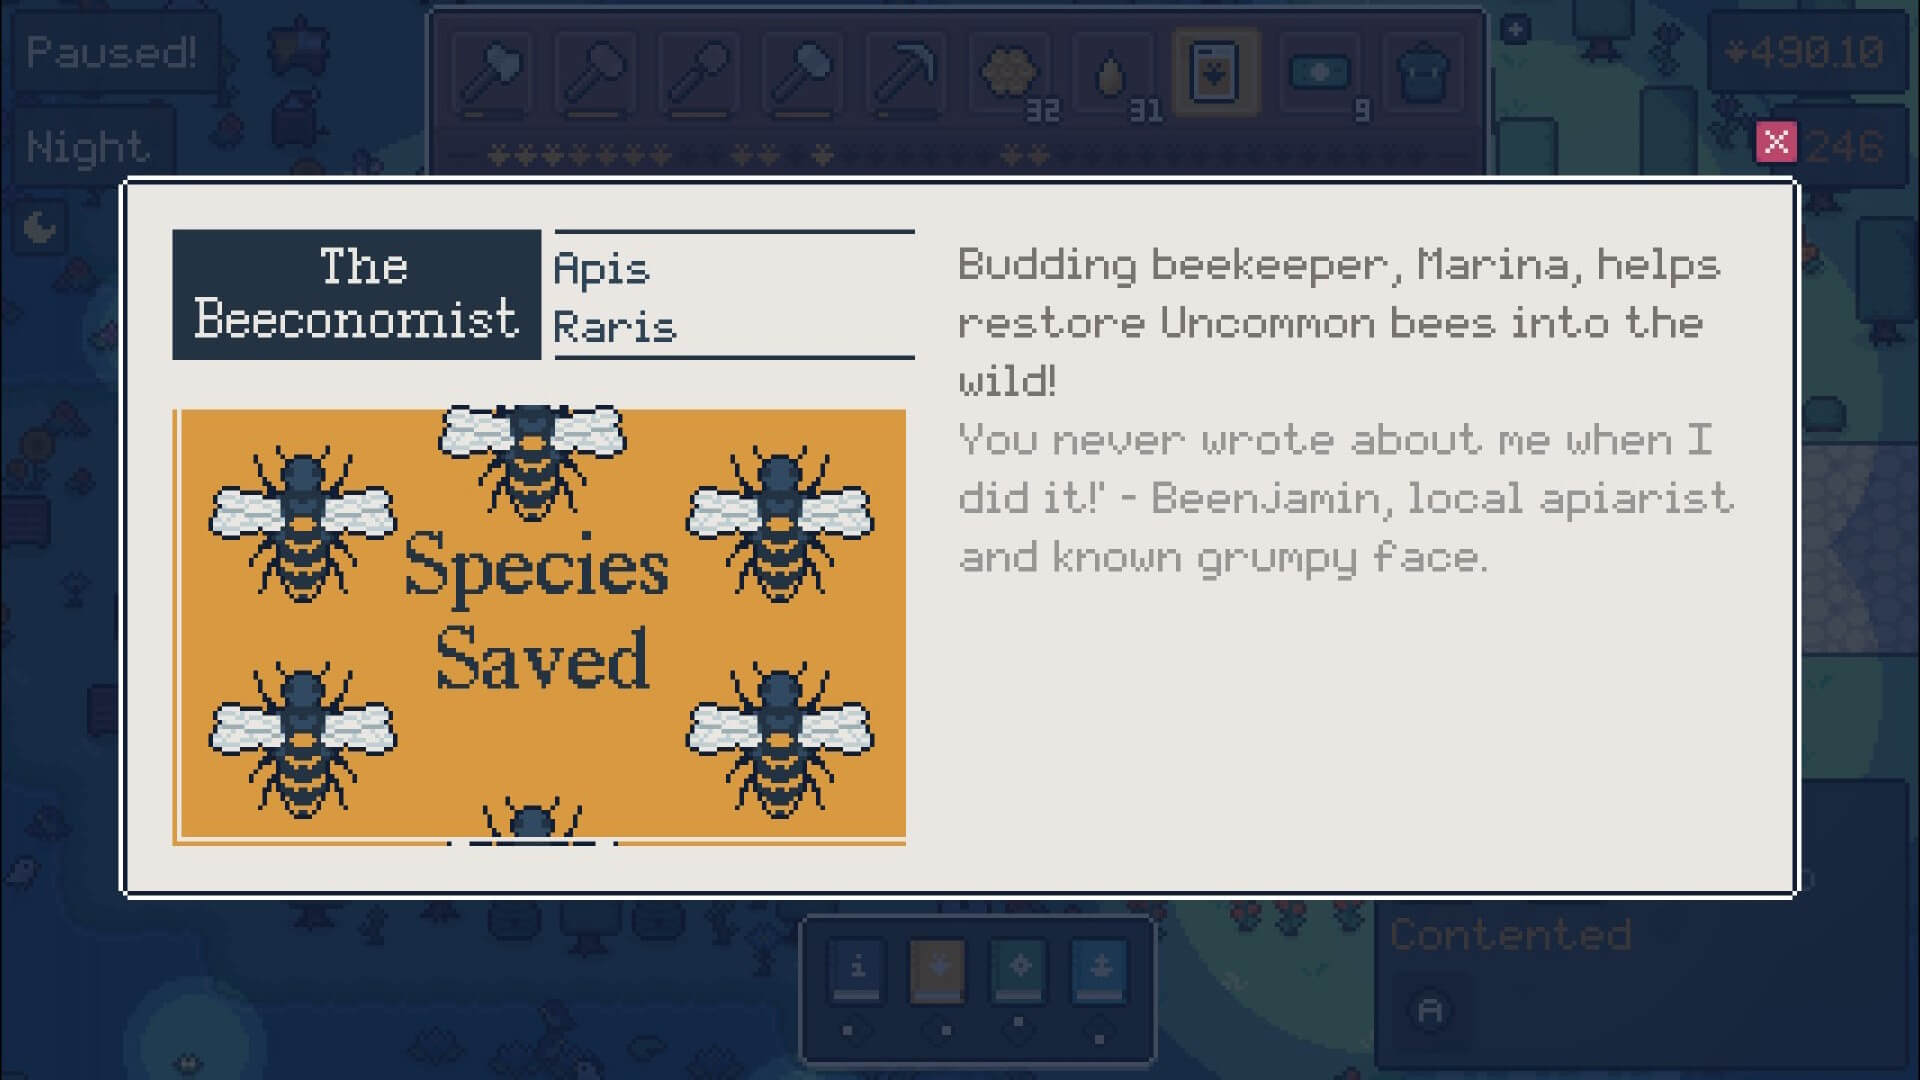 A screenshot of The Beeconomist from APICO, sharing a headline that says the Uncommon Bees have returned to a thriving state of living in the wilderness.